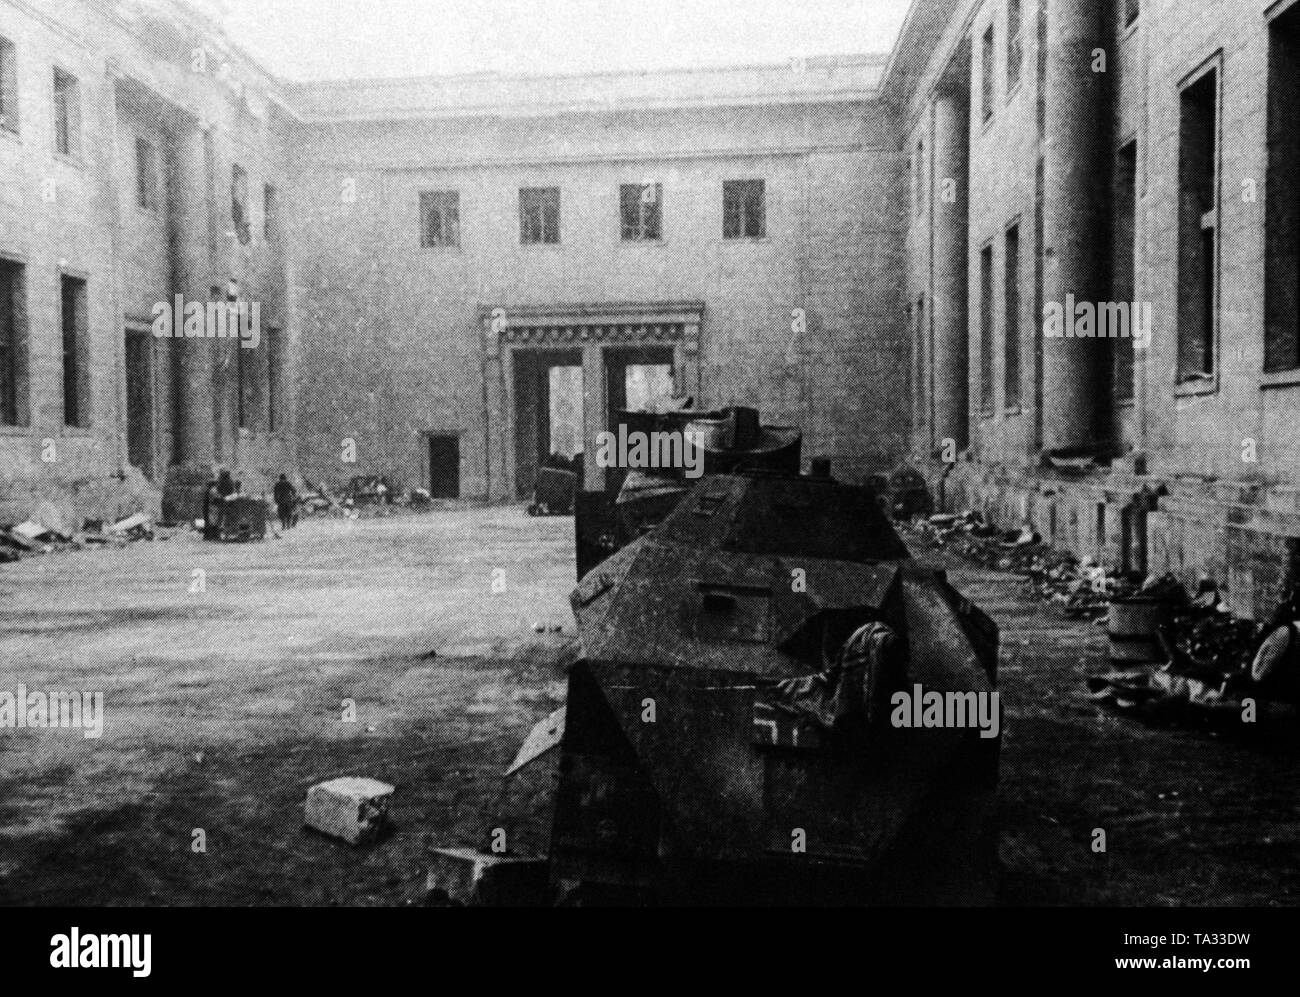 Photo of the main courtyard of the destroyed Reich Chancellery immediately after its capture by the Soviet troops. In the foreground, the wreck of a shot down German armored car, in the background the large portal to Wilhelmstrasse. Stock Photo